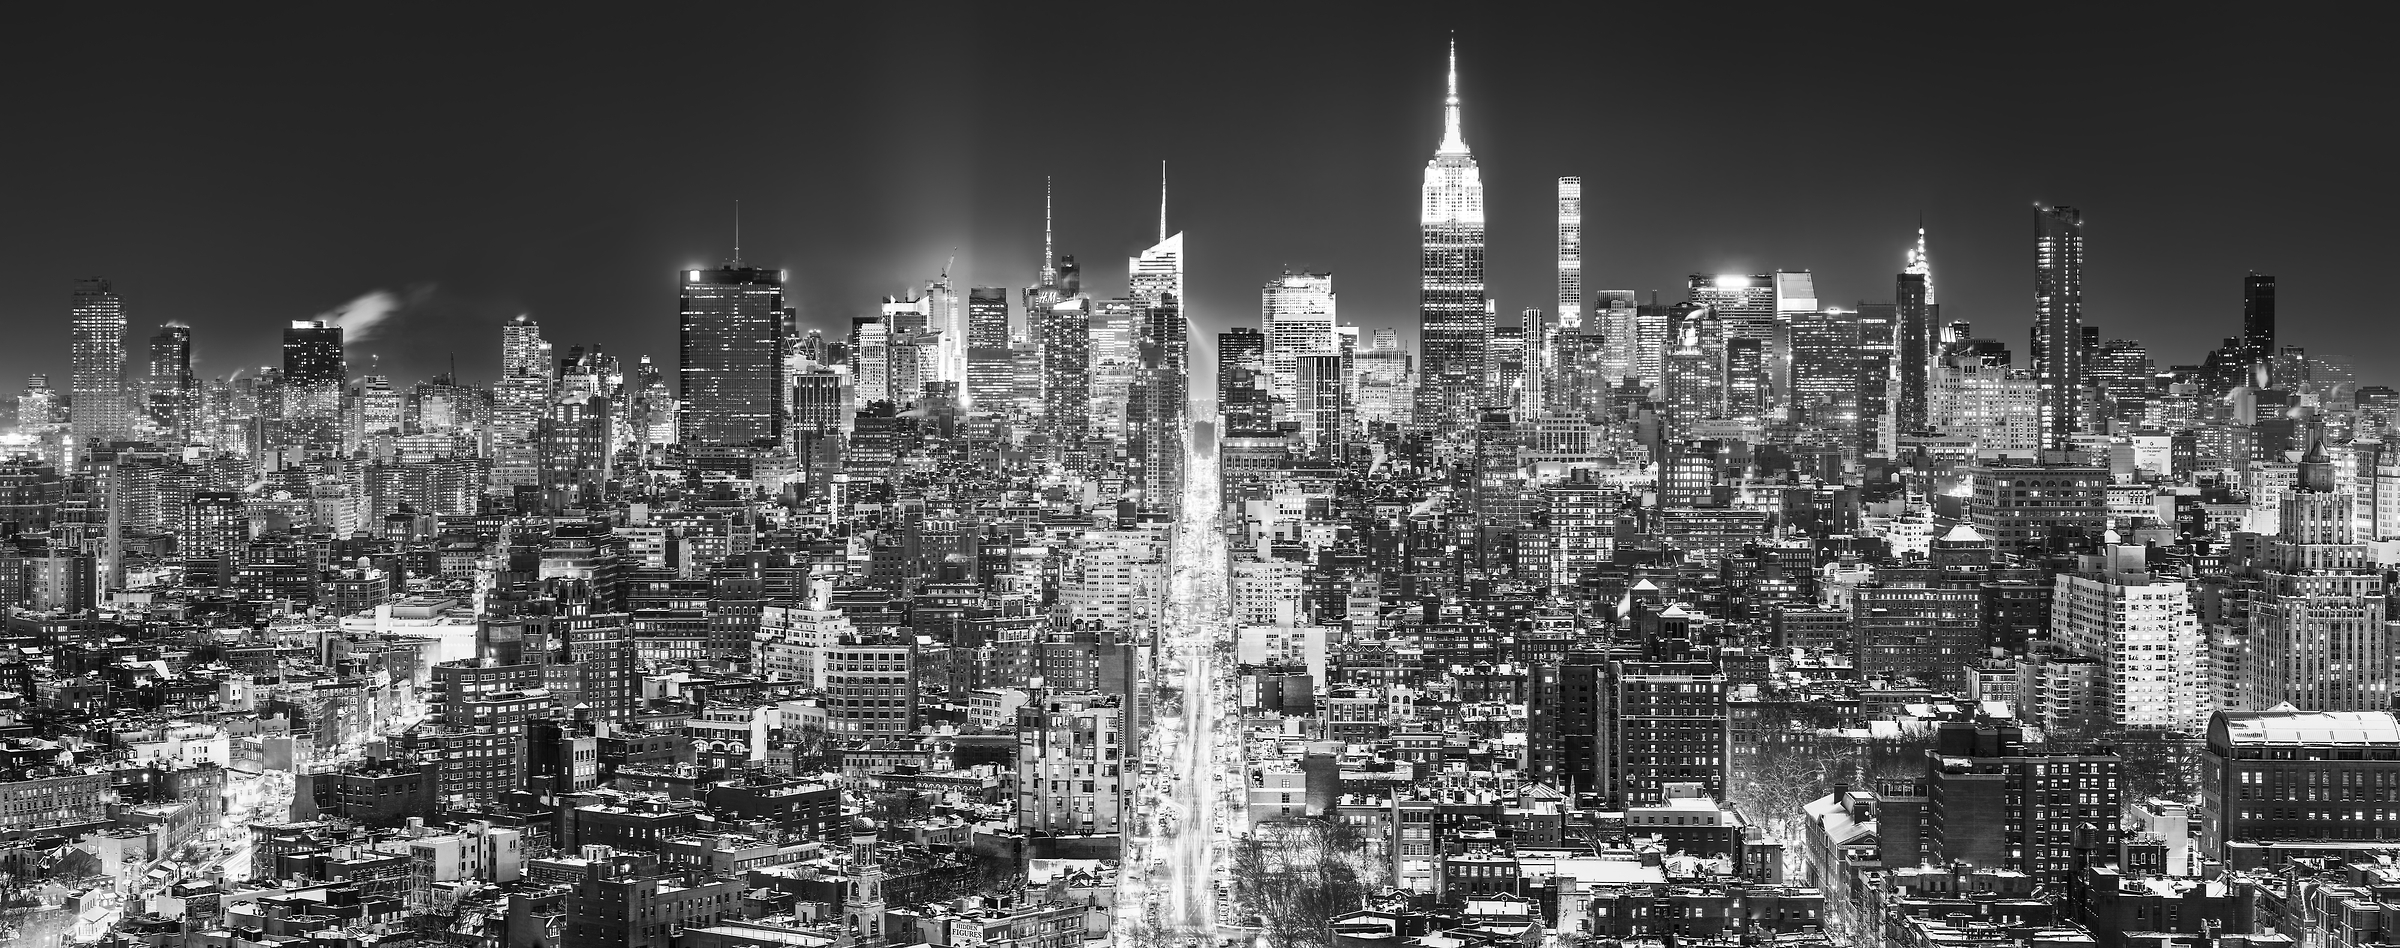 2,002 megapixels! A very high resolution, large-format VAST photo print of the Manhattan NYC skyline in winter snow at night; black and white cityscape fine art photo created by Dan Piech in New York City.